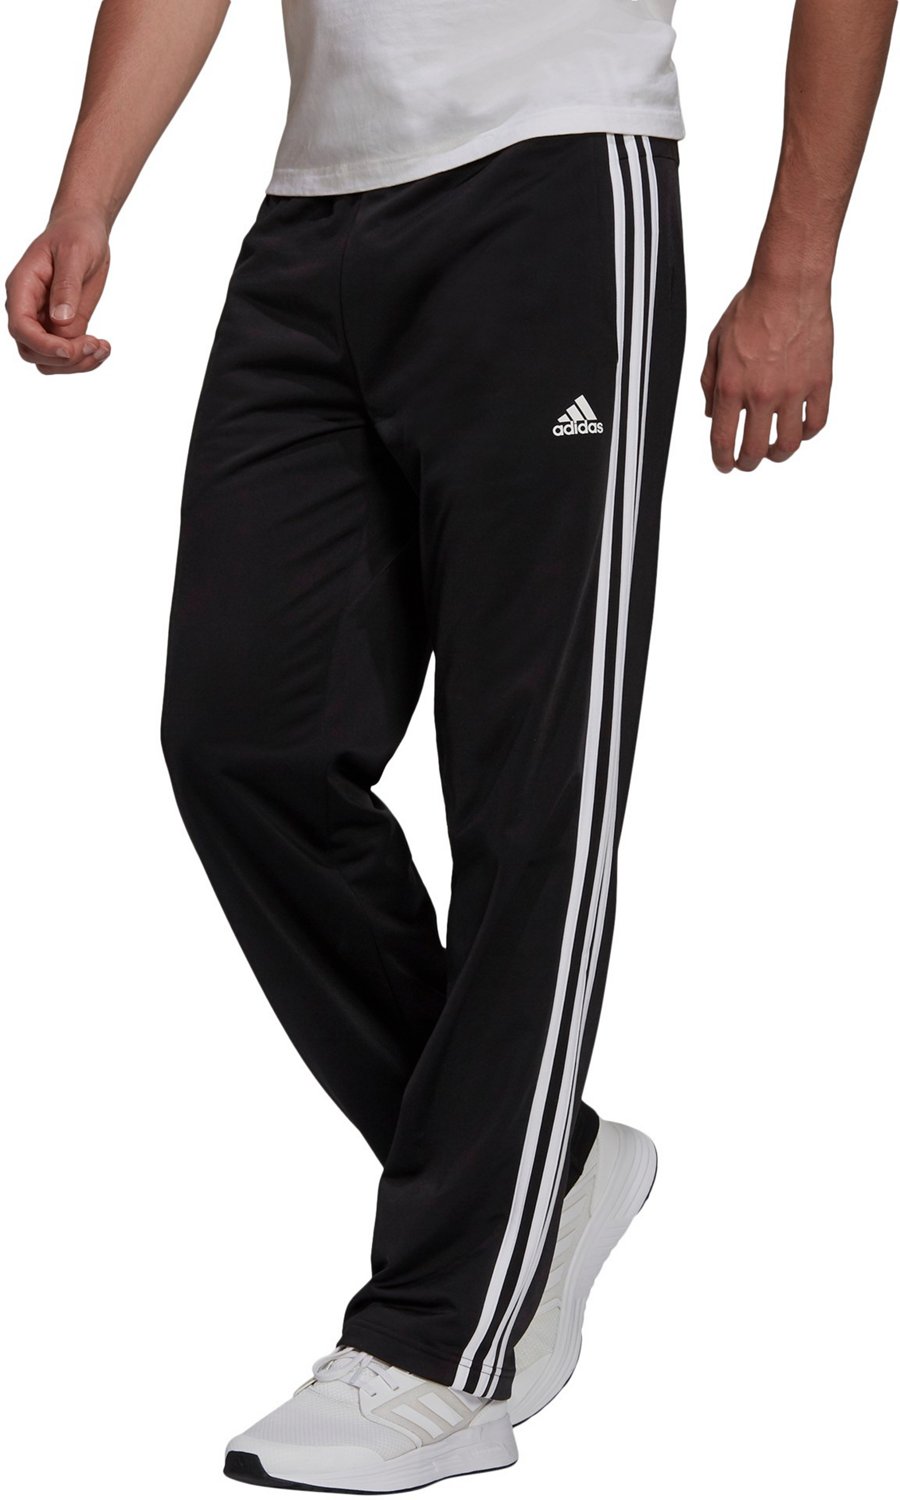 Adidas Sweatpants Mens L Navy Blue Polyester White 3 Stripes Relaxed Fit